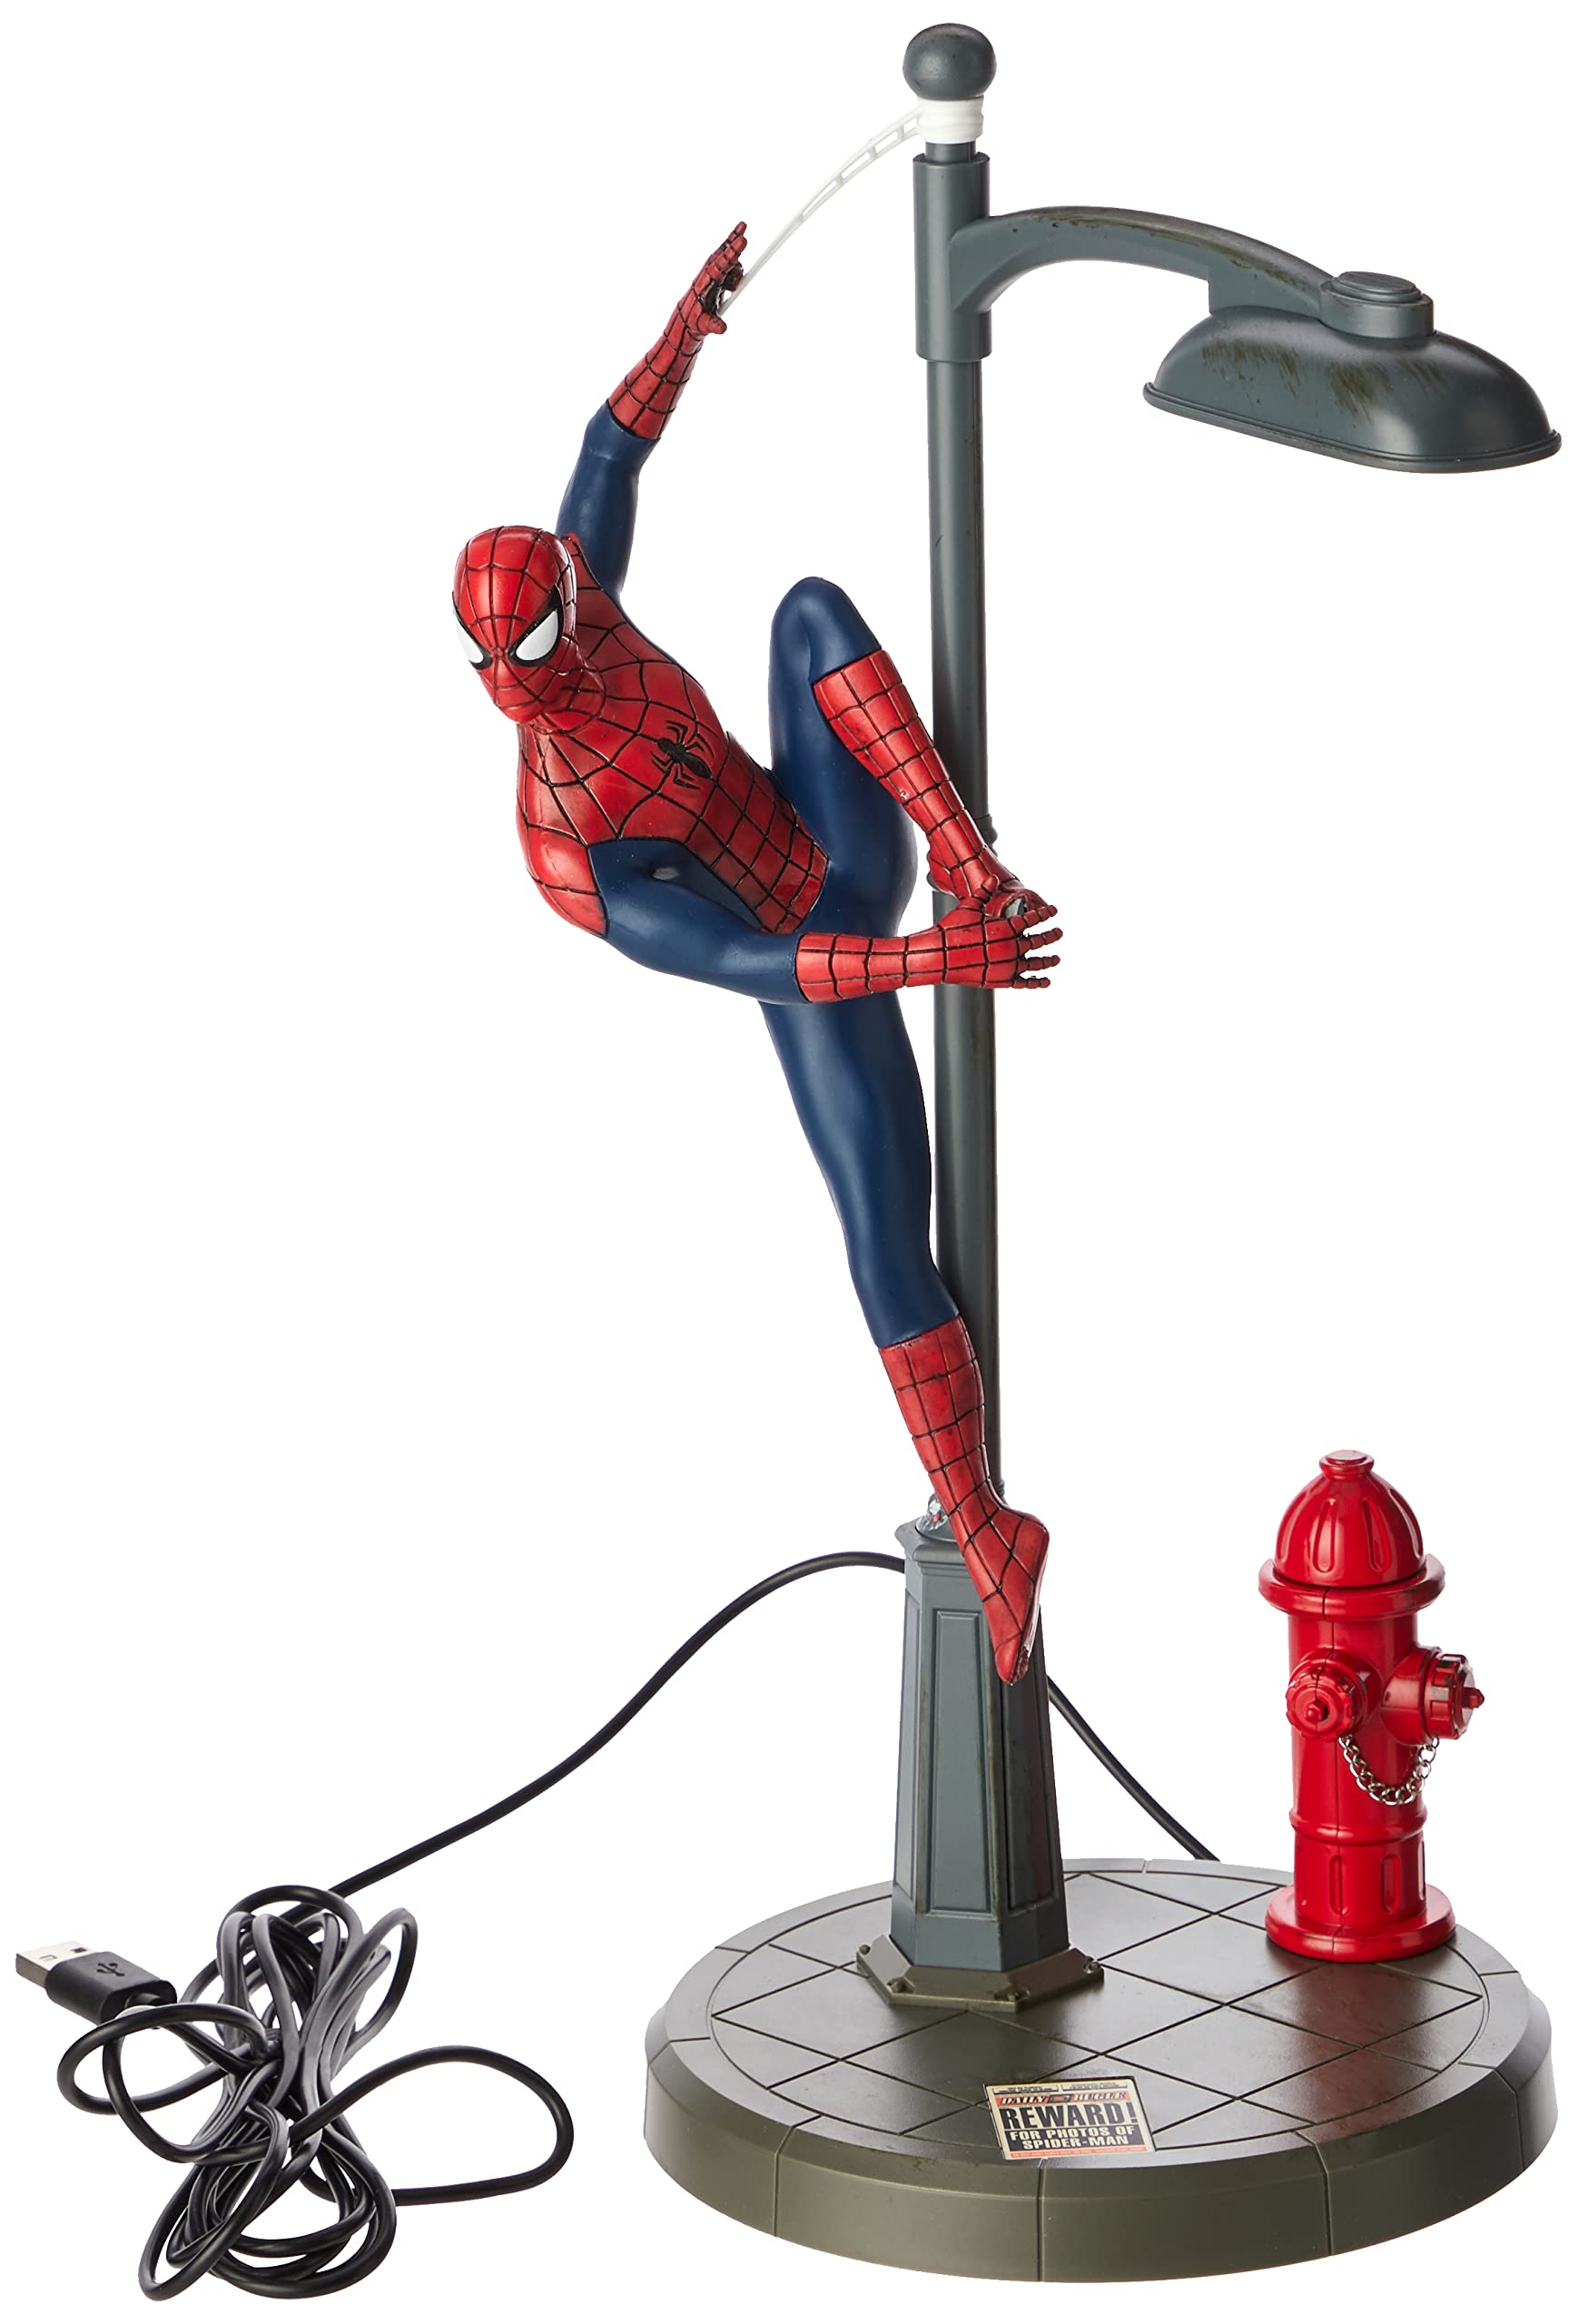 Paladone Spiderman Lamp, Spidey Table Lamp Licensed Marvel Comics Merchandise, Red, Blue, Gray, PP6369MC